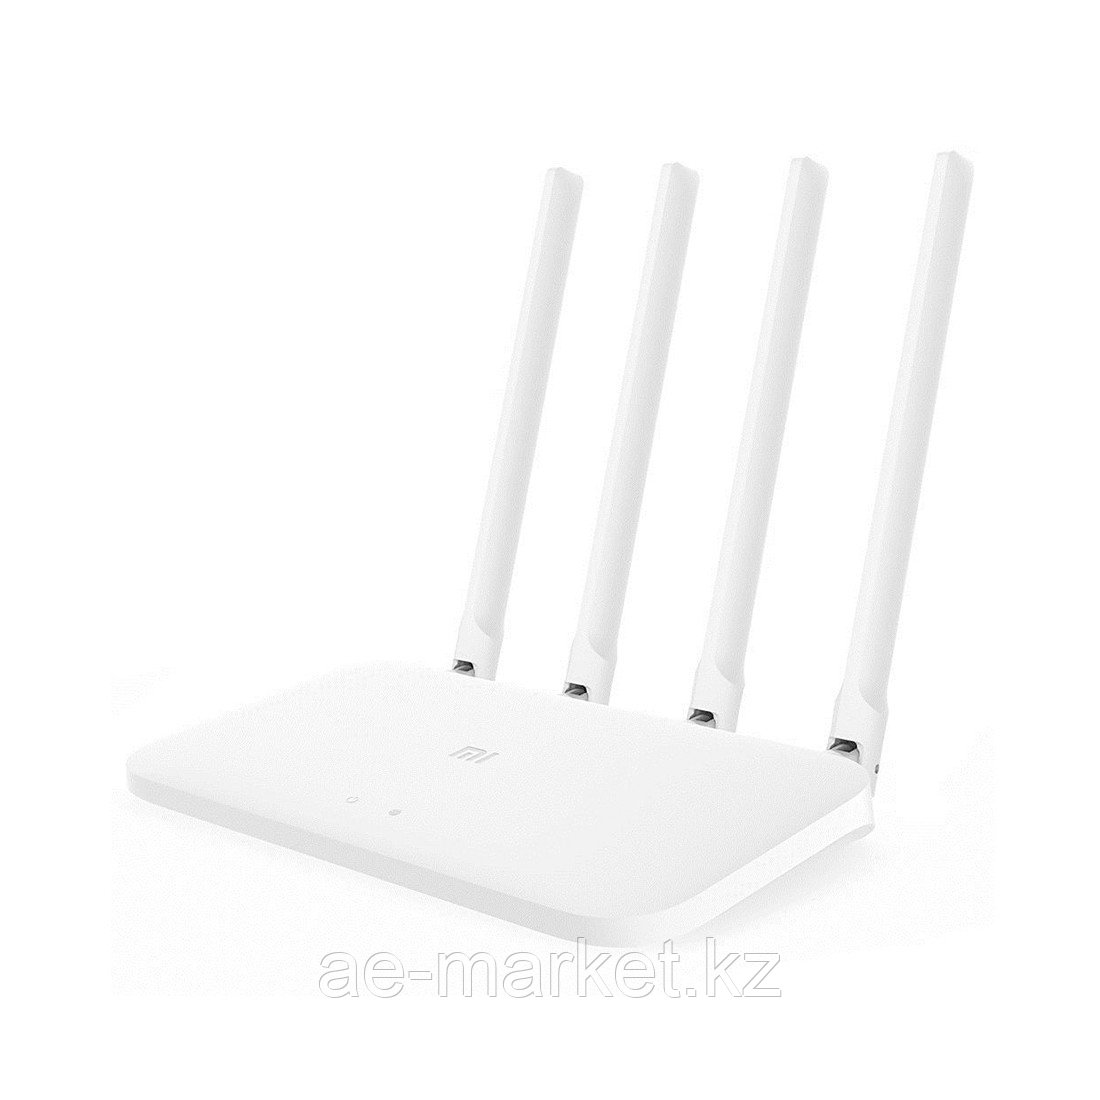 Маршрутизатор Xiaomi Mi Router 4A Giga Version, фото 1